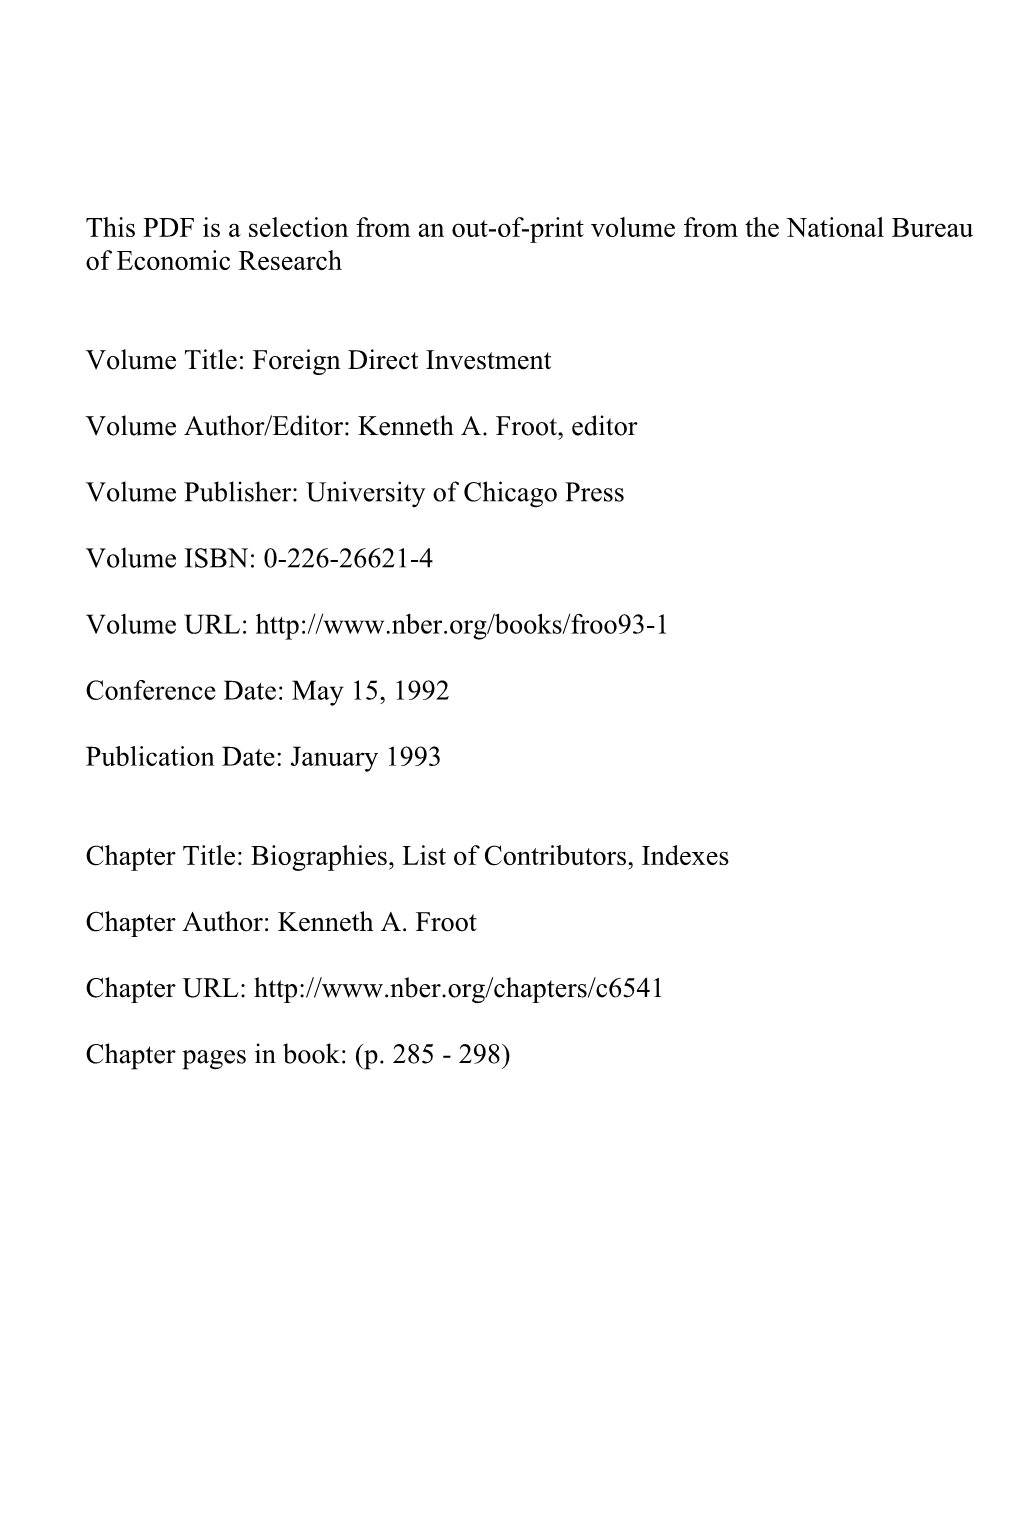 Biographies, List of Contributors, Indexes